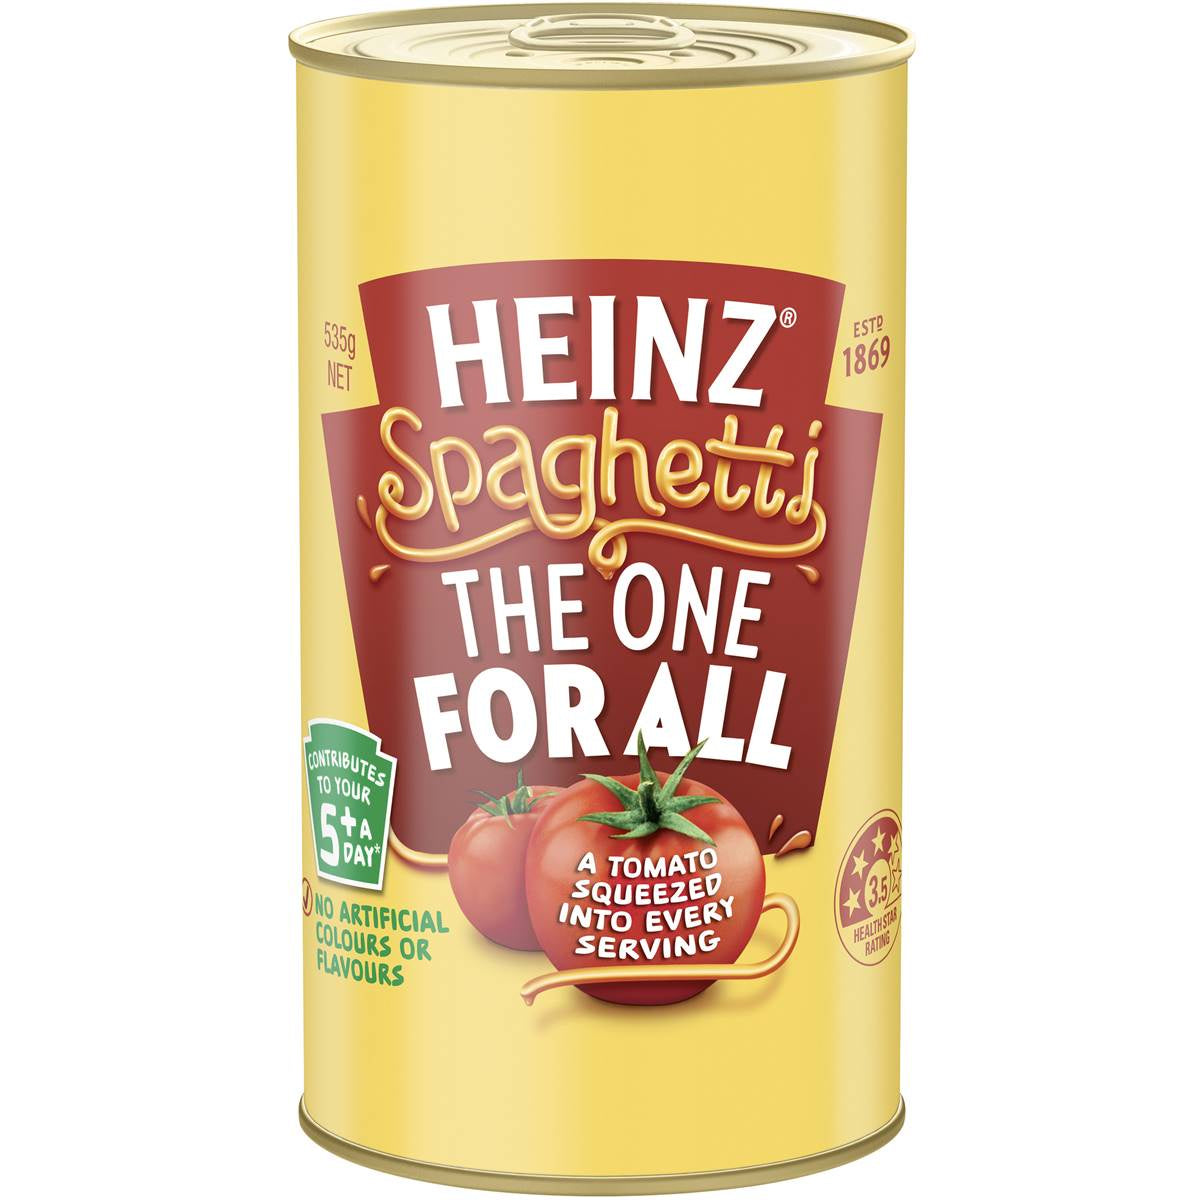 Heinz Spaghetti Cheese The One For All Pasta 535g